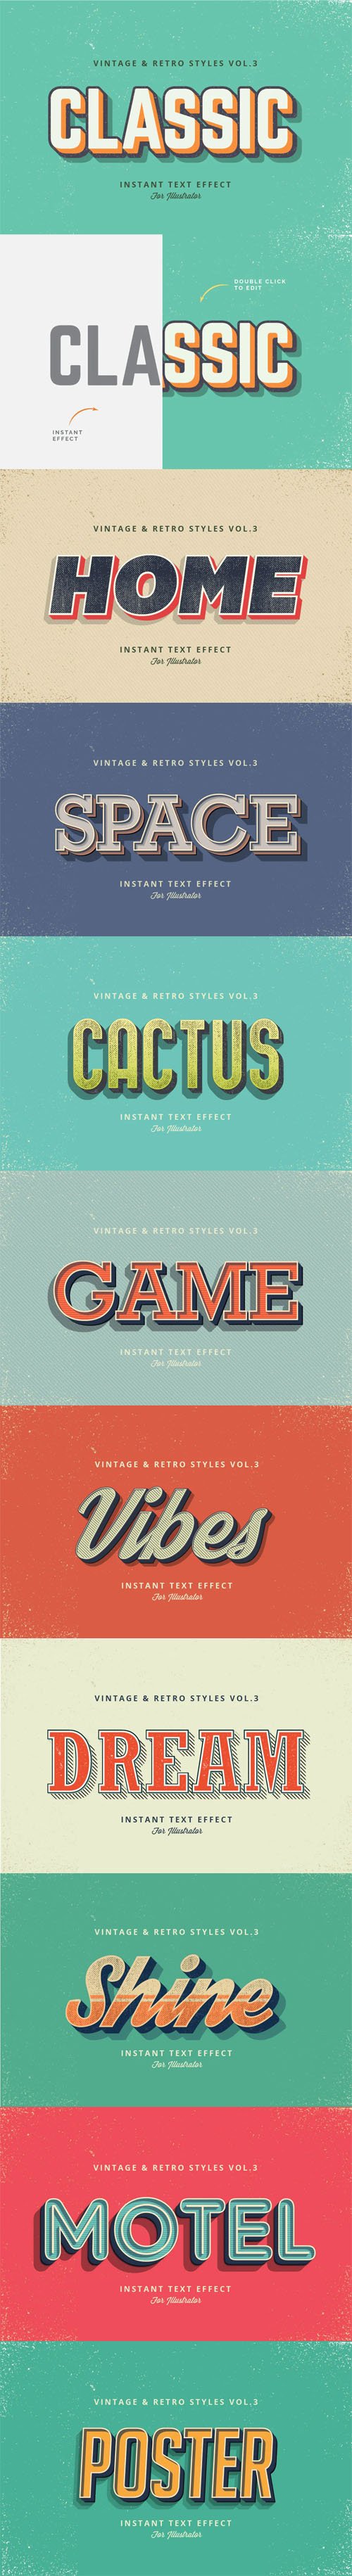 10 Vintage and Retro Graphic Styles Vol.3 for Adobe Illustrator